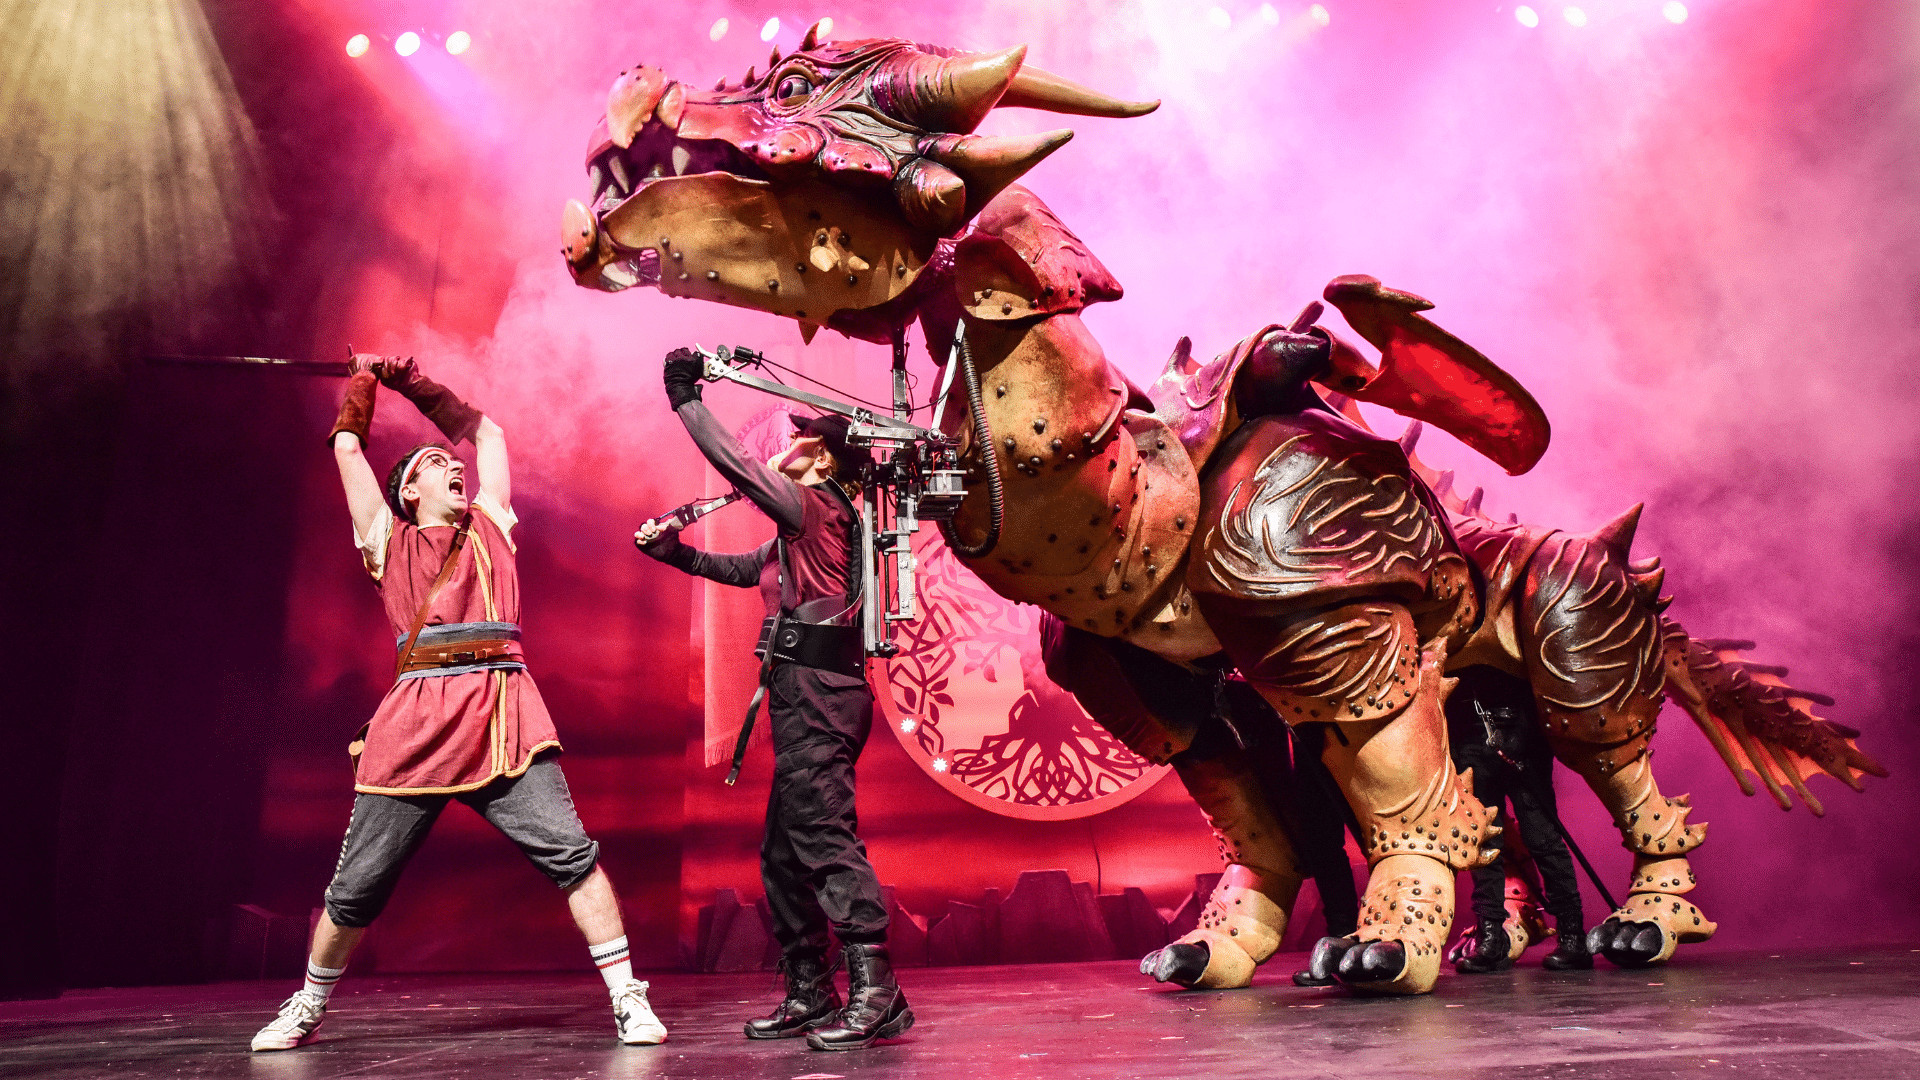 Dragons & Mythical Beasts production photo. Amid smoke and beams of light, a huge, bronze dragon is puppeteered by two performers who are swallowed within its huge mass. A bespectacled man in a red tunic wields a long-sword in the direction of the beast’s ginormous, rearing head.